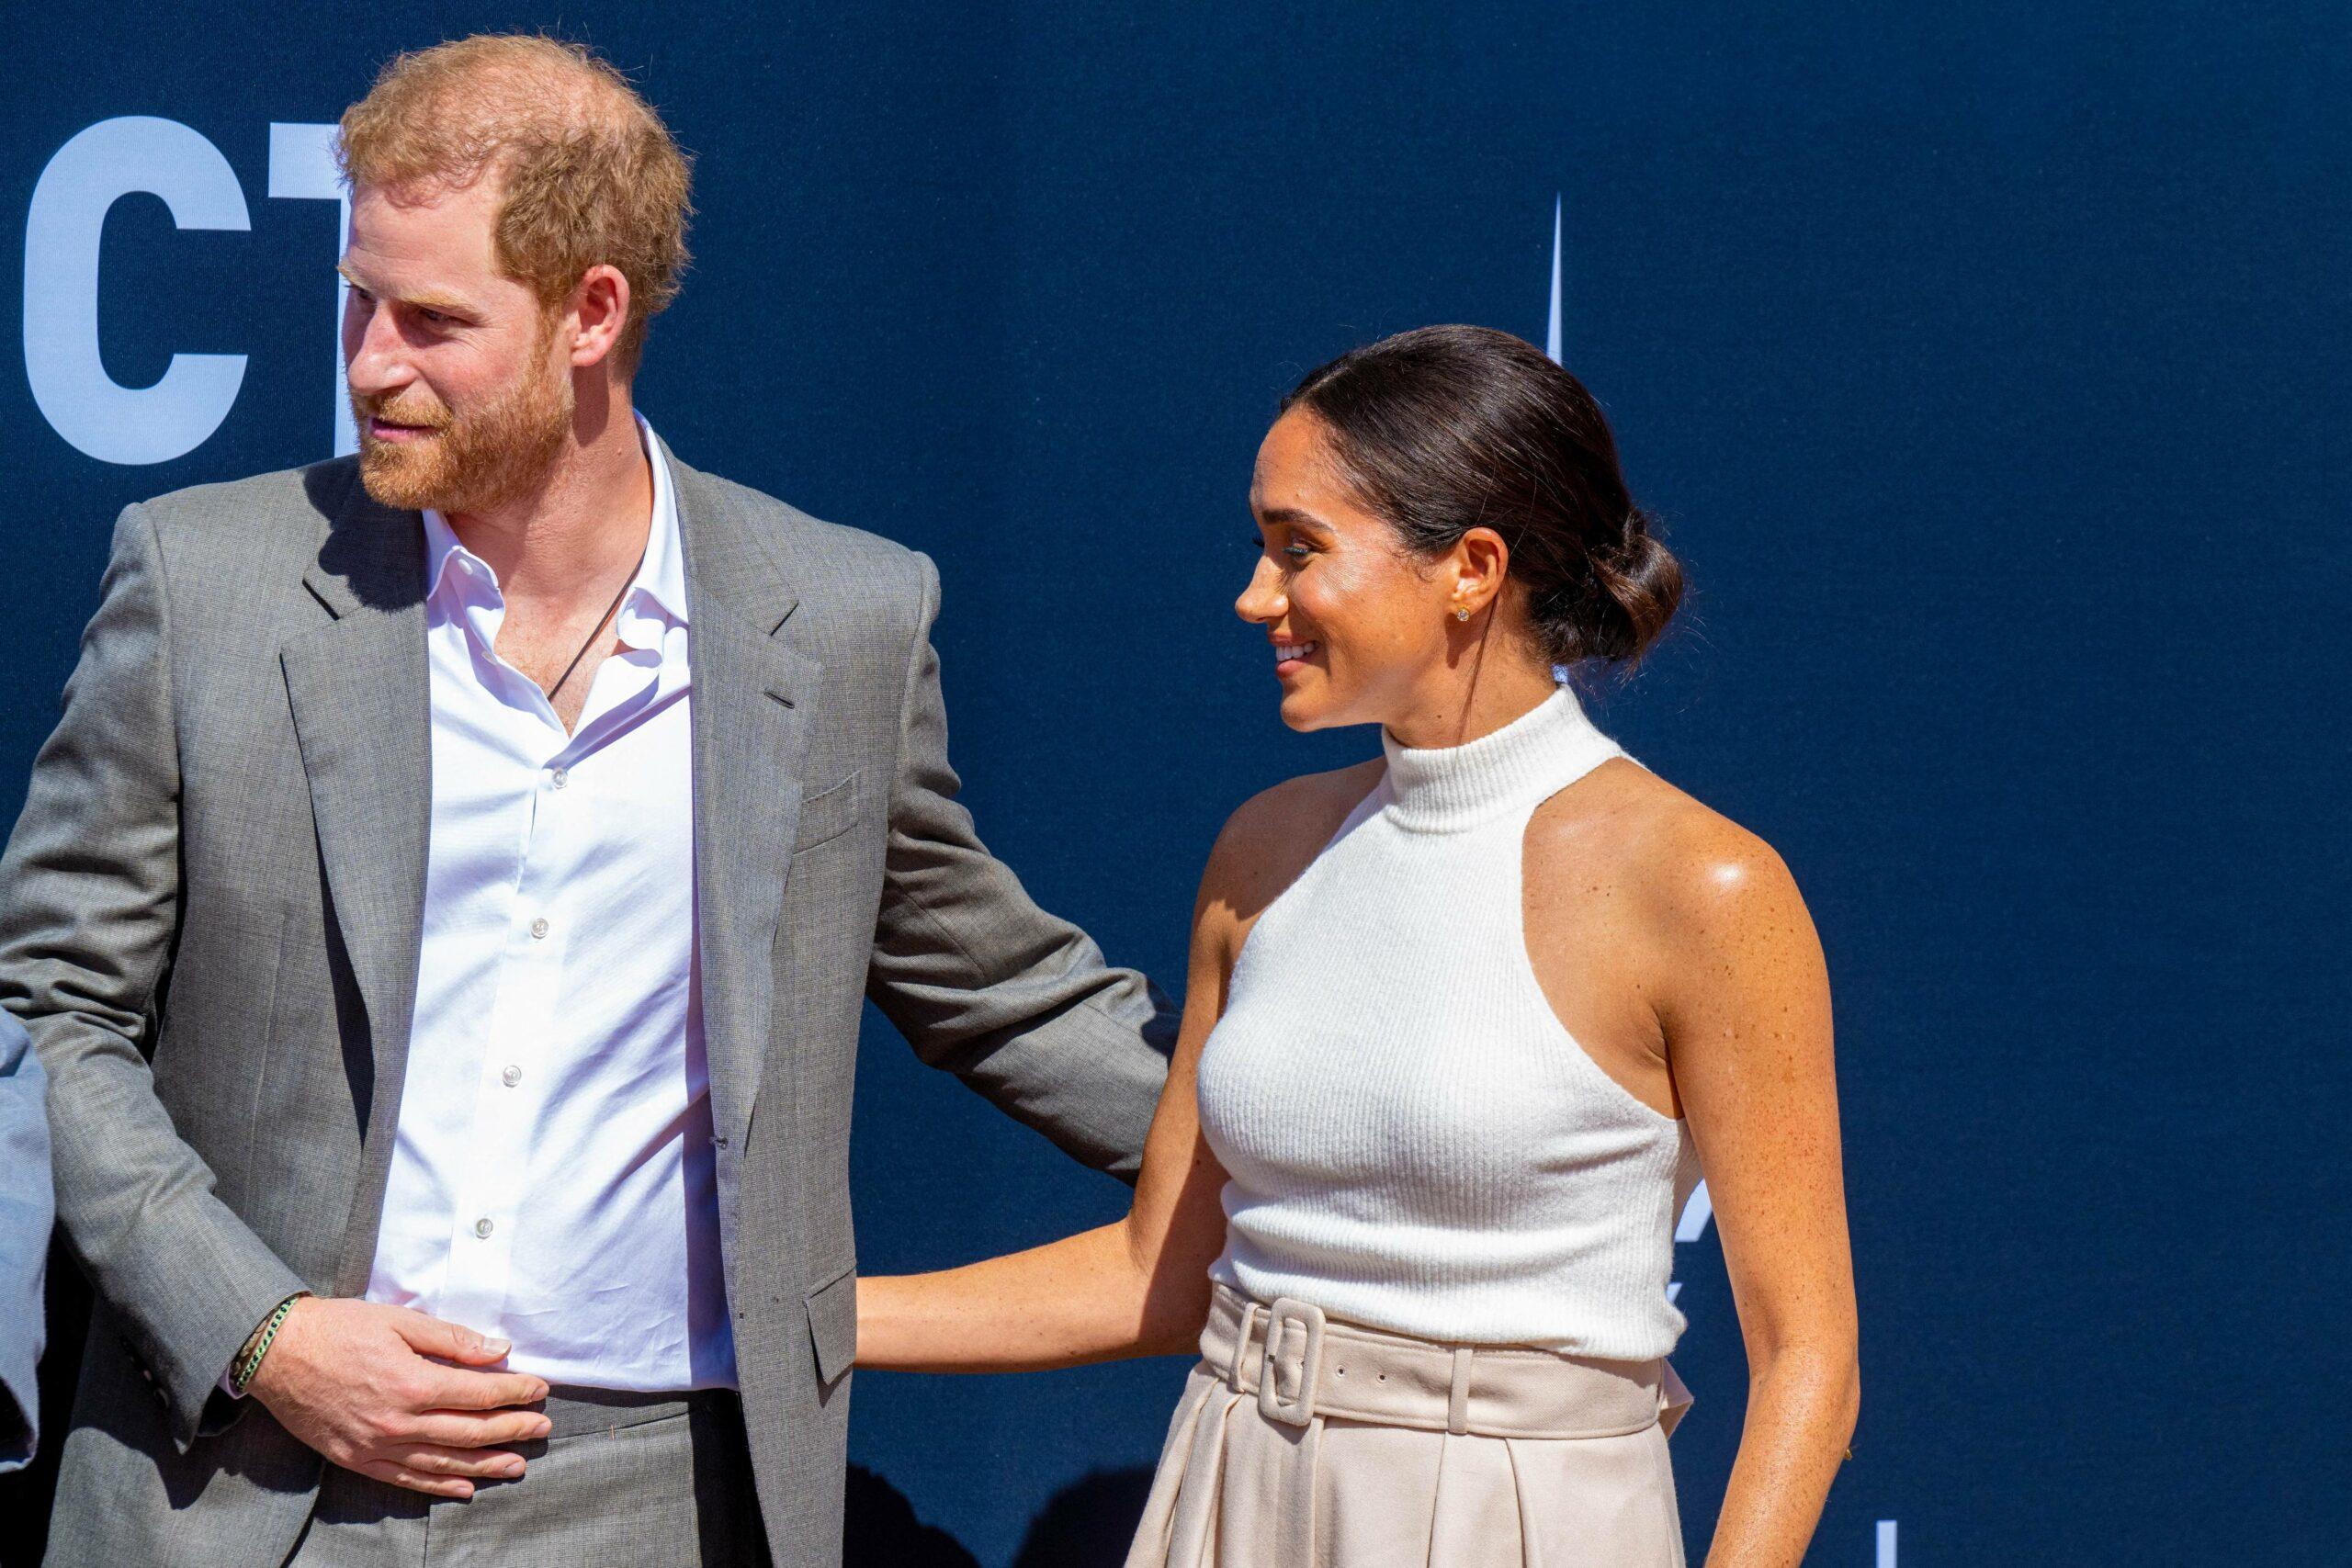 Prince Harry and Meghan visit One Year to Go event for Invictus Games 2023, Dusseldorf, Germany - 6 Sep 2022